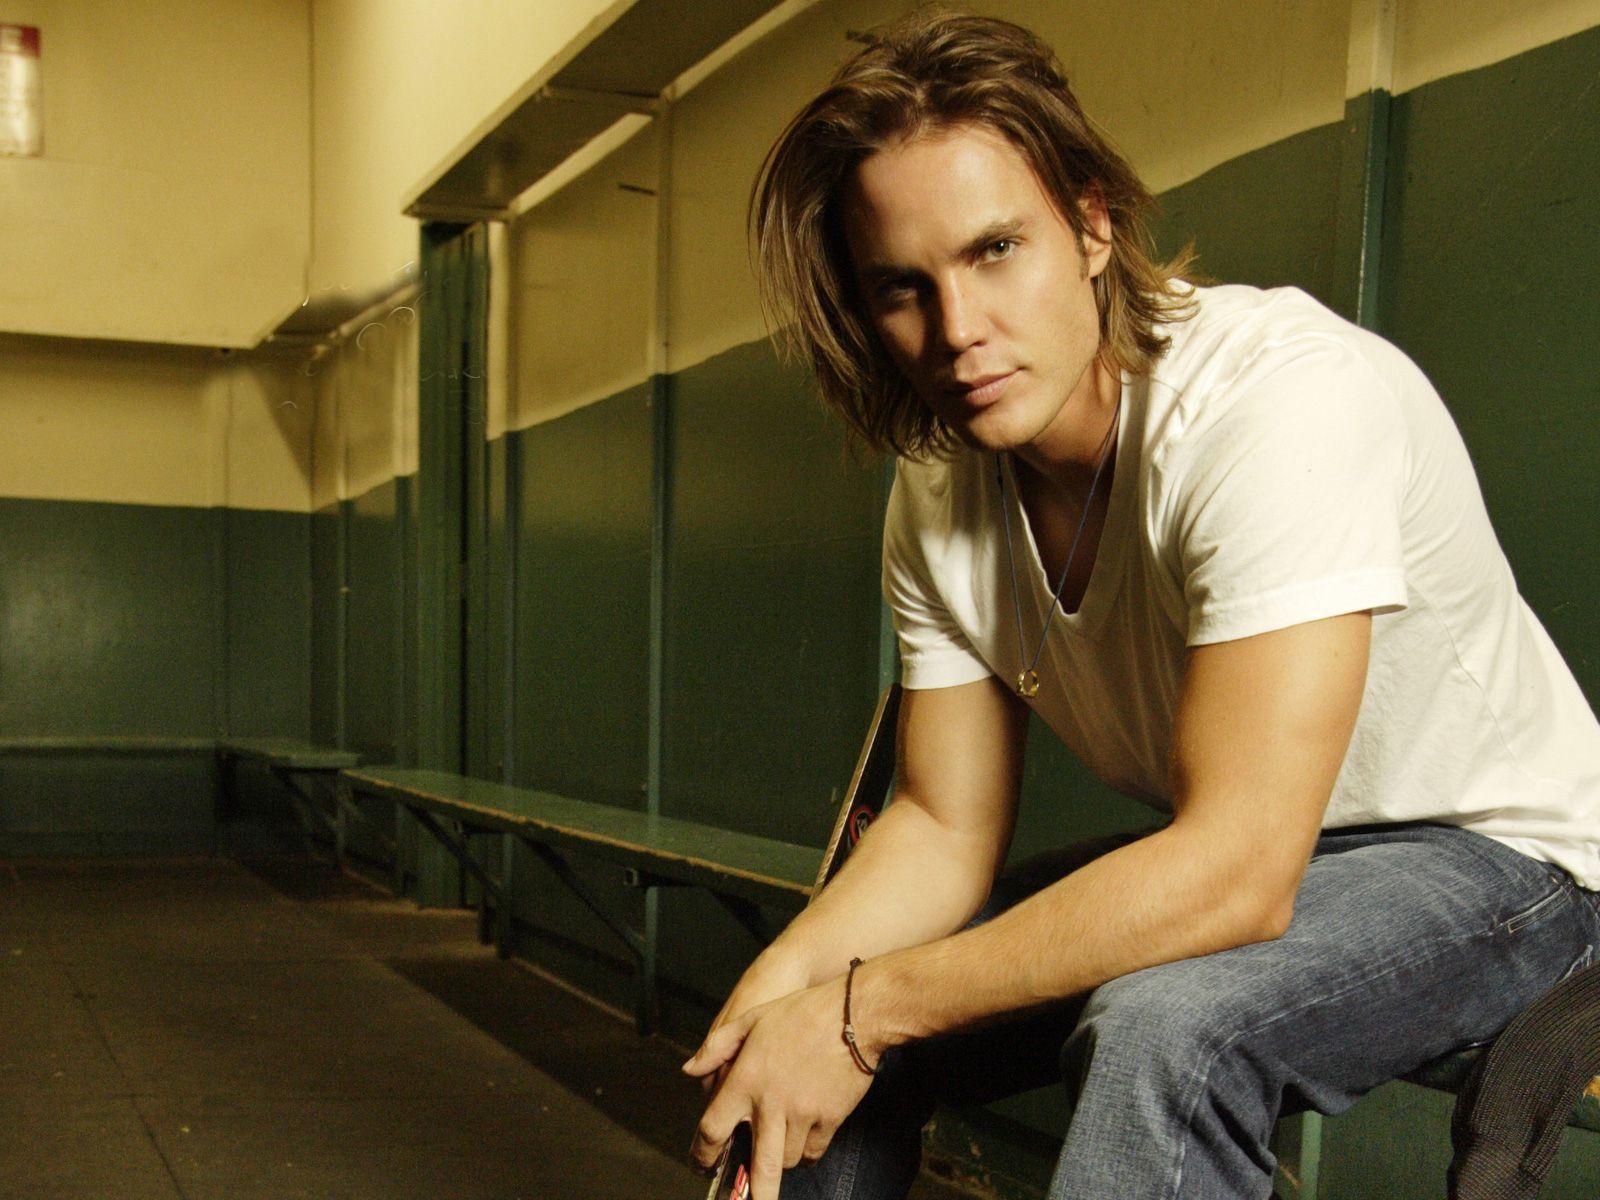 Taylor Kitsch Wallpaper. Daily inspiration art photo, picture